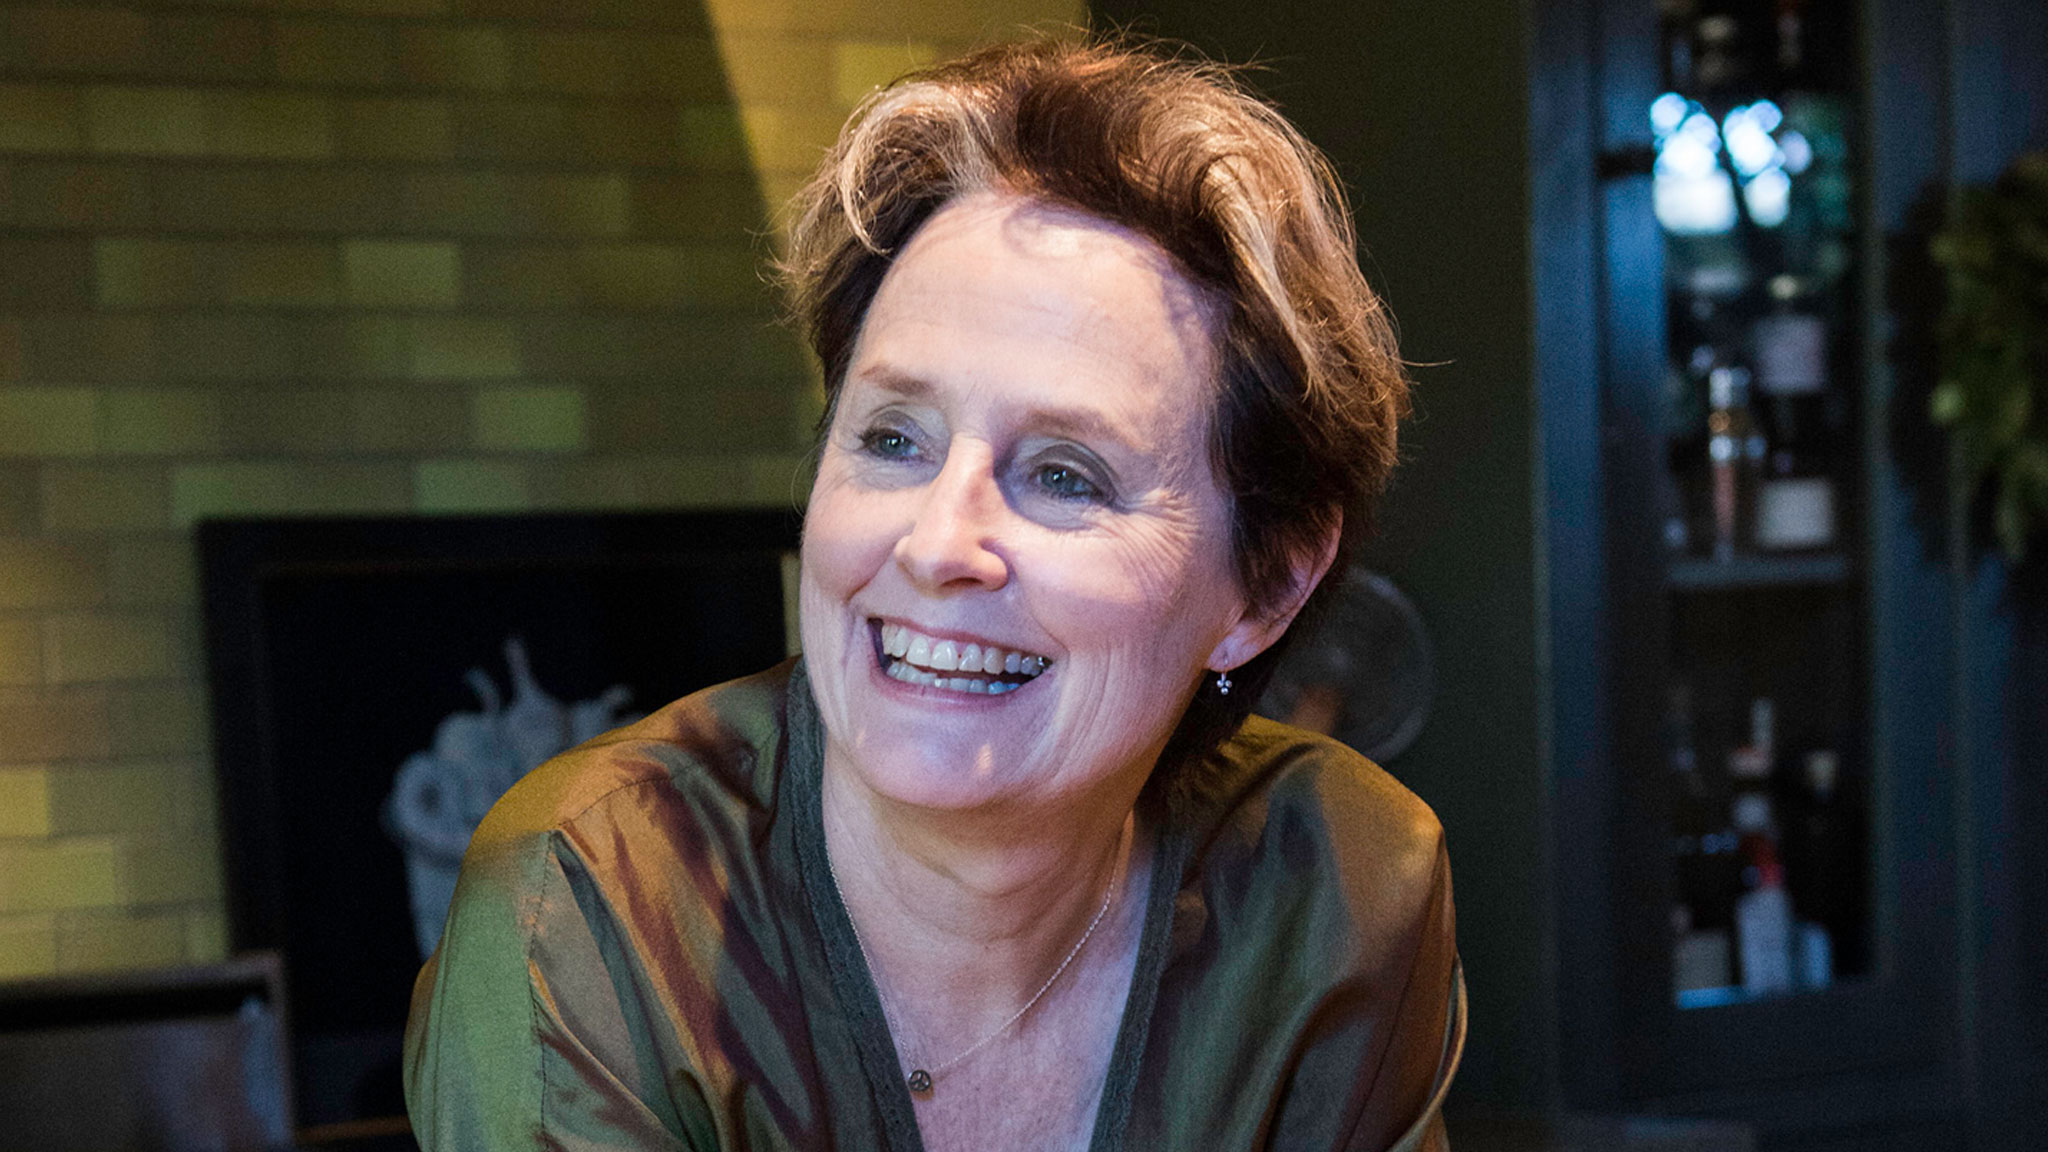 Smiling Alice Waters wearing a green outfit